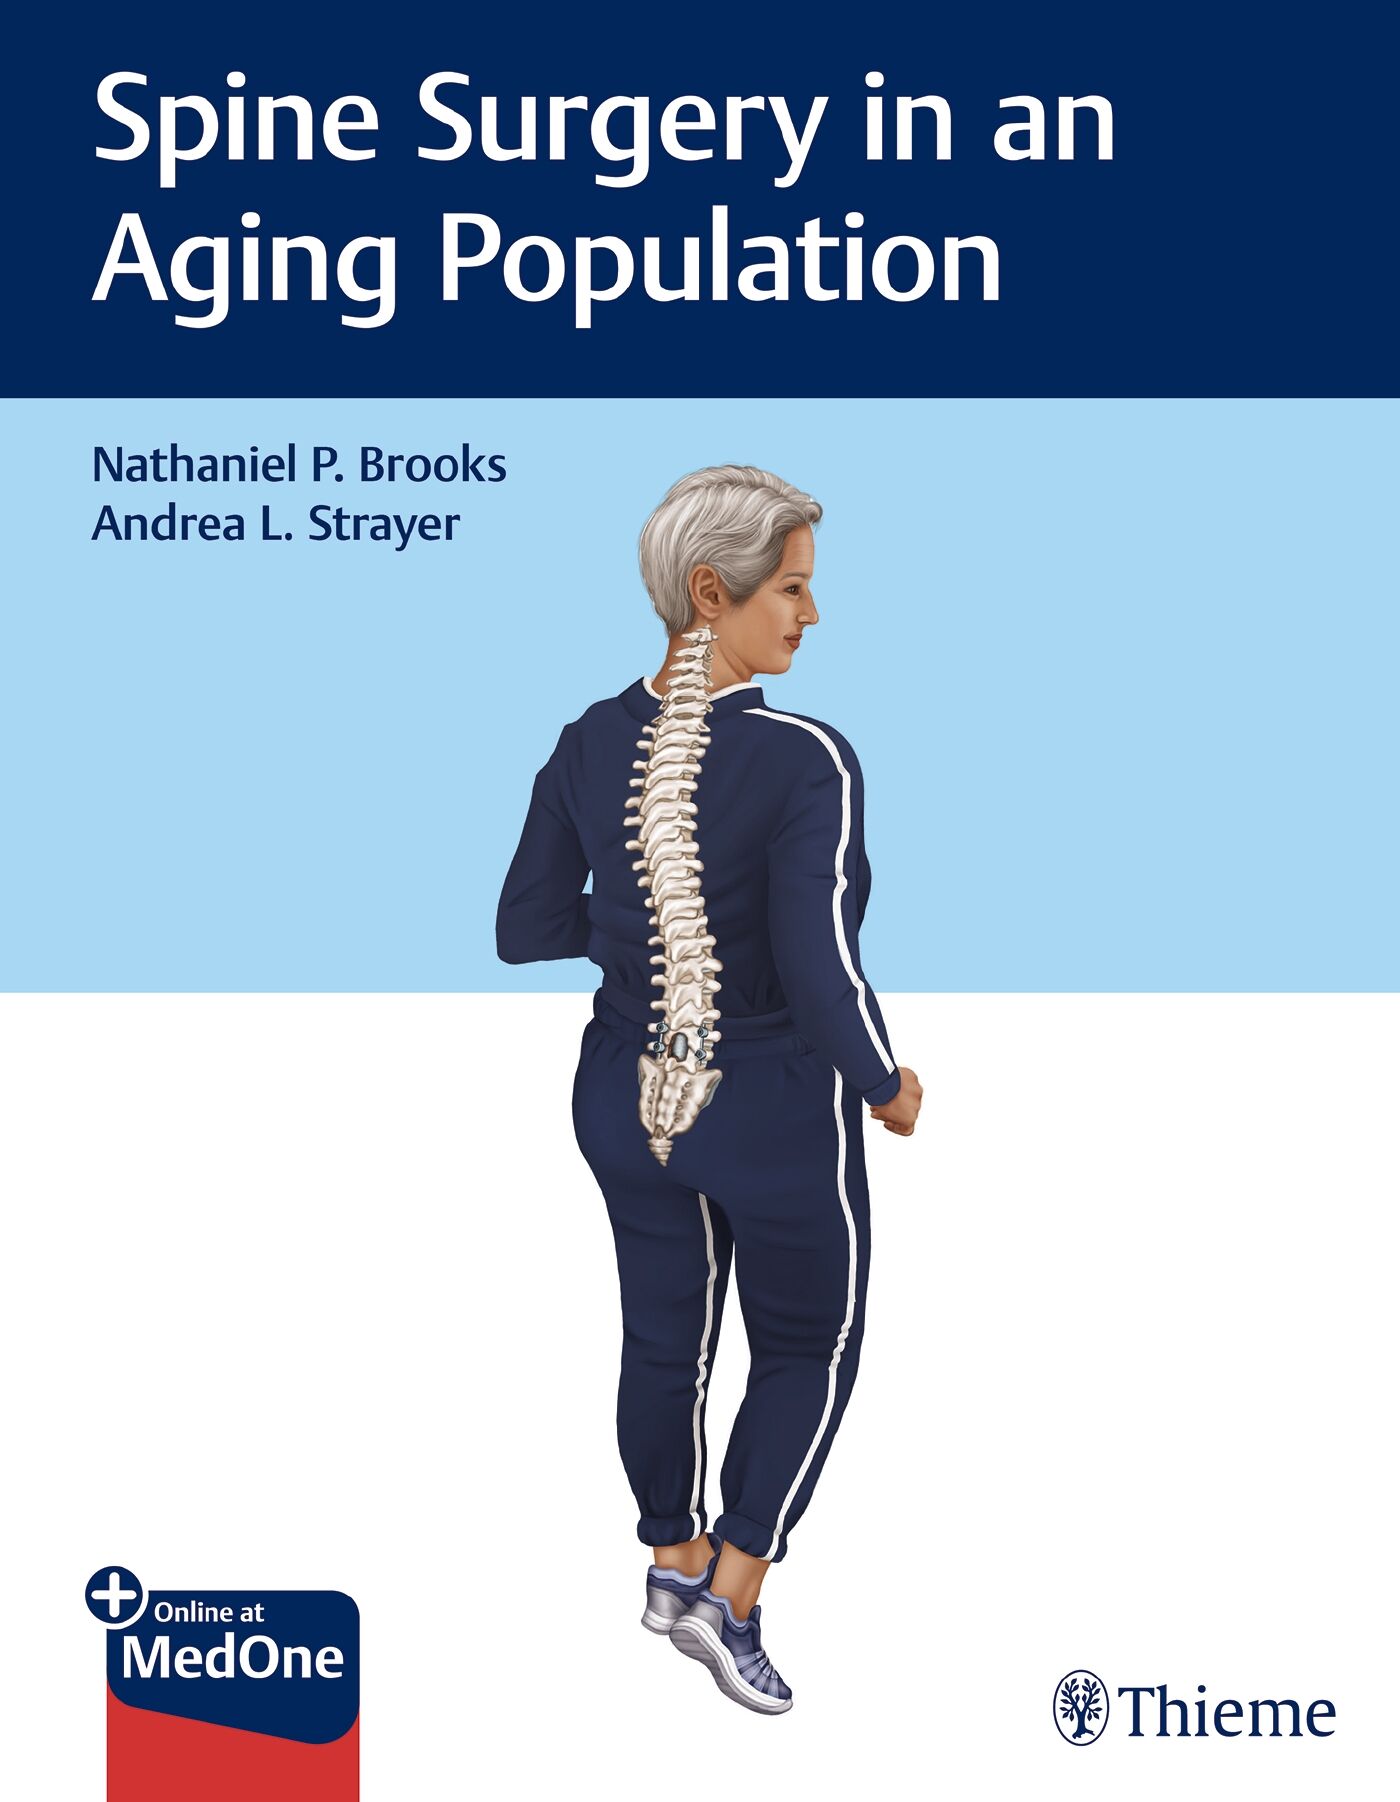 Spine Surgery in an Aging Population, 9781626239142